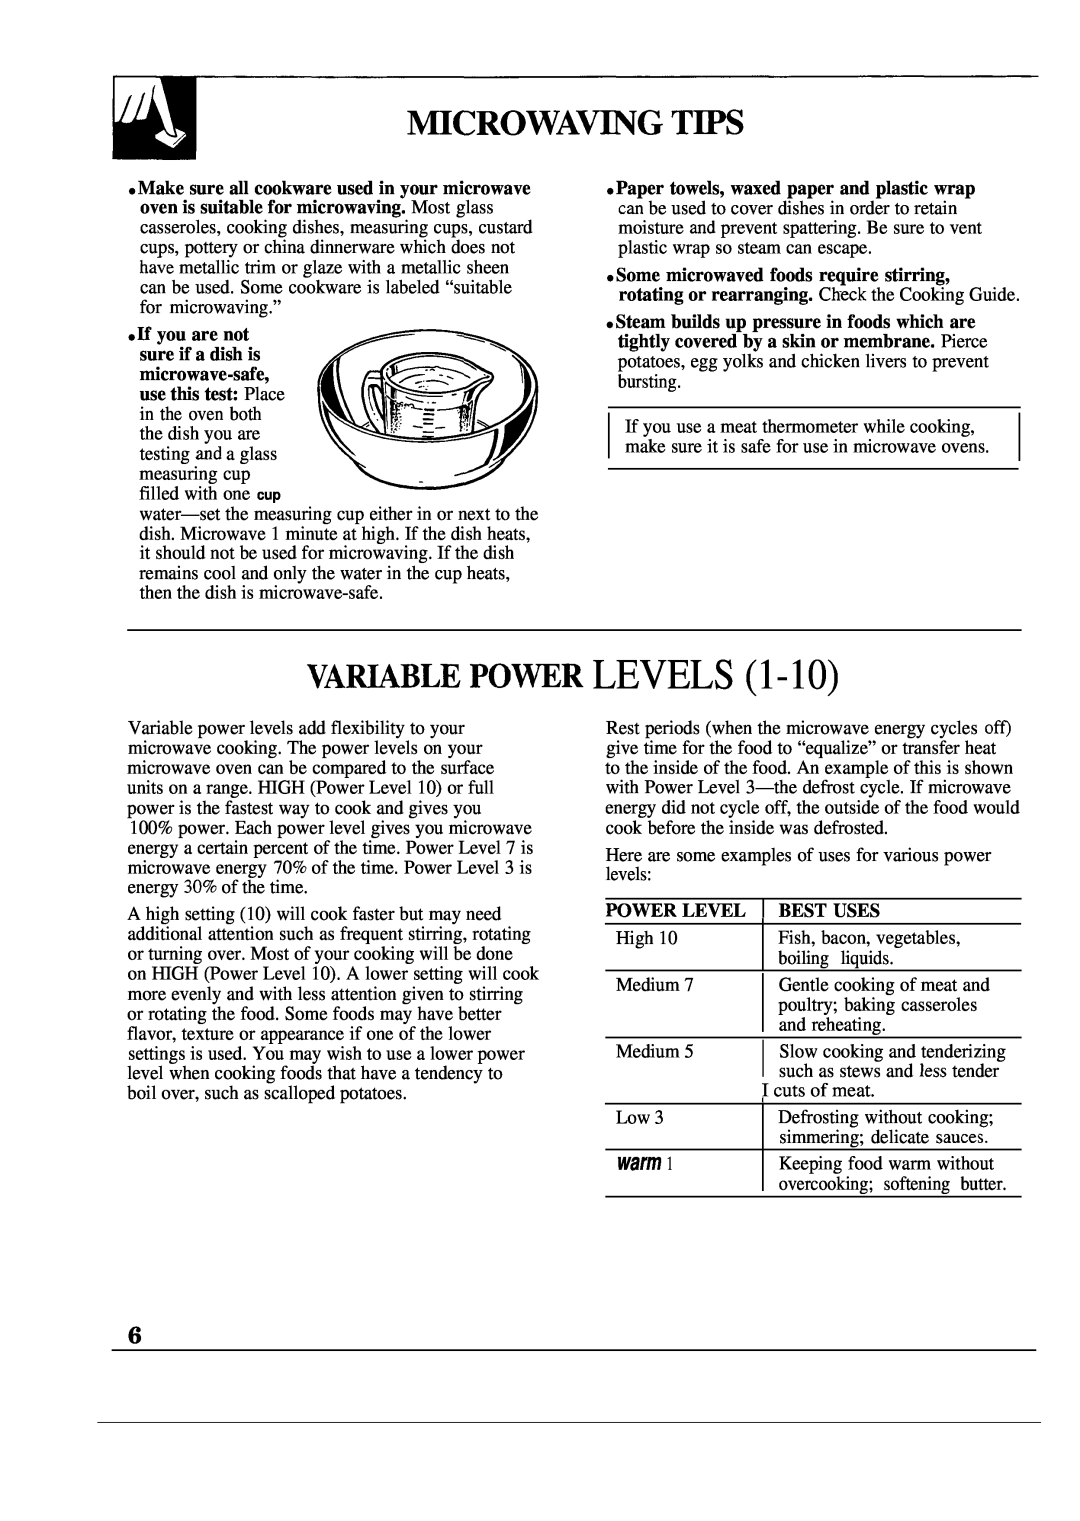 GE JEM23L operating instructions Va~Ble Po~R Levels, warm, E you are not, Powr Level, Best Uses 